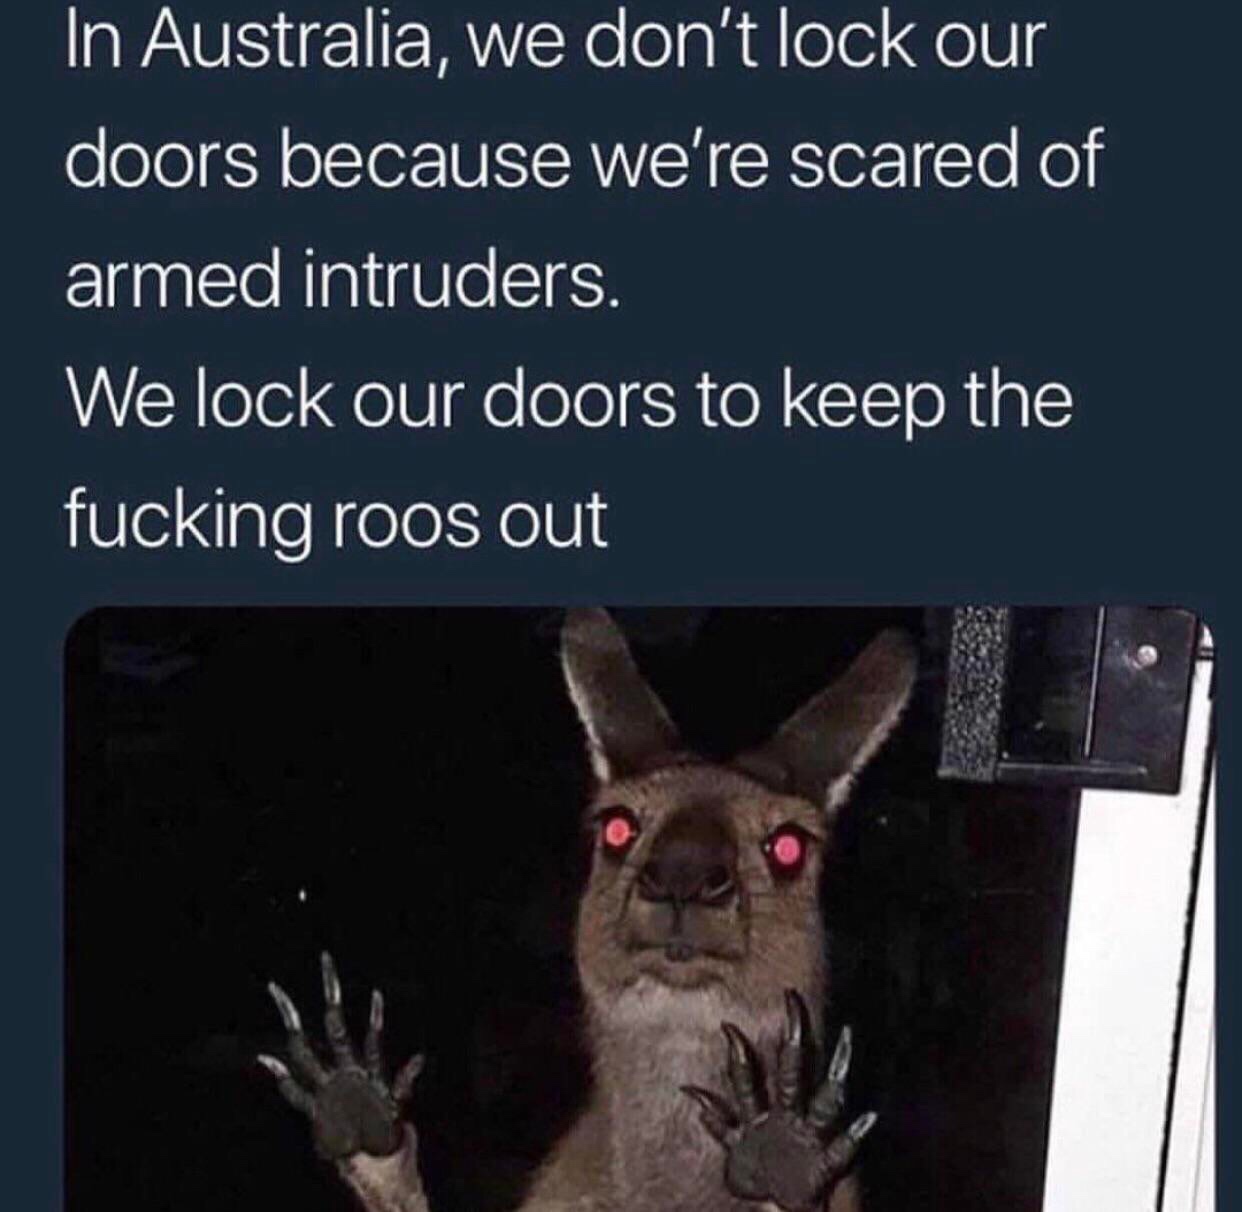 scary part of living in australia - In Australia, we don't lock our doors because we're scared of armed intruders. We lock our doors to keep the fucking roos out